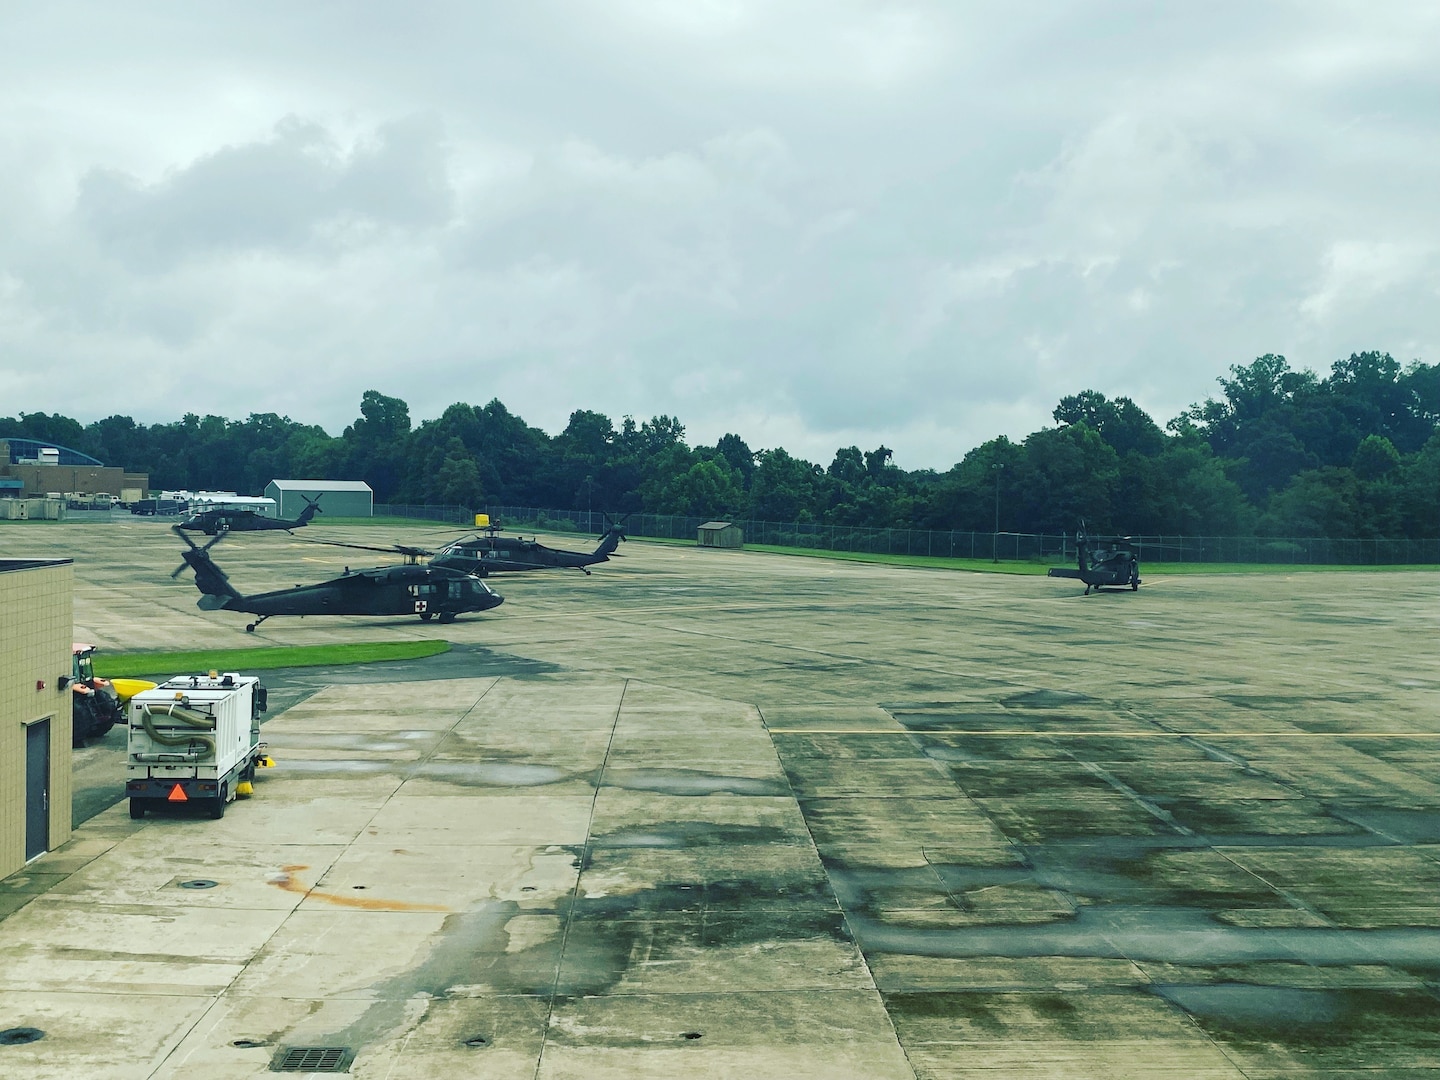 Two West Virginia National Guard UH-60M Blackhawks sit on the tarmac during pre-flight operations at Big Sandy Regional Airport in Pike County, Kentucky, July 29, 2022. Fourteen Soldiers from the WVNG’s Company C, 2-104th General Support Aviation Battalion (MEDEVAC) and Company B, 1-224th Security and Support Aviation Battalion located in Williamstown, West Virginia, flew more than 25 hours July 28, 2022, rescuing over a dozen people and three pets from southeastern Kentucky following catastrophic flash flooding. (courtesy photo)